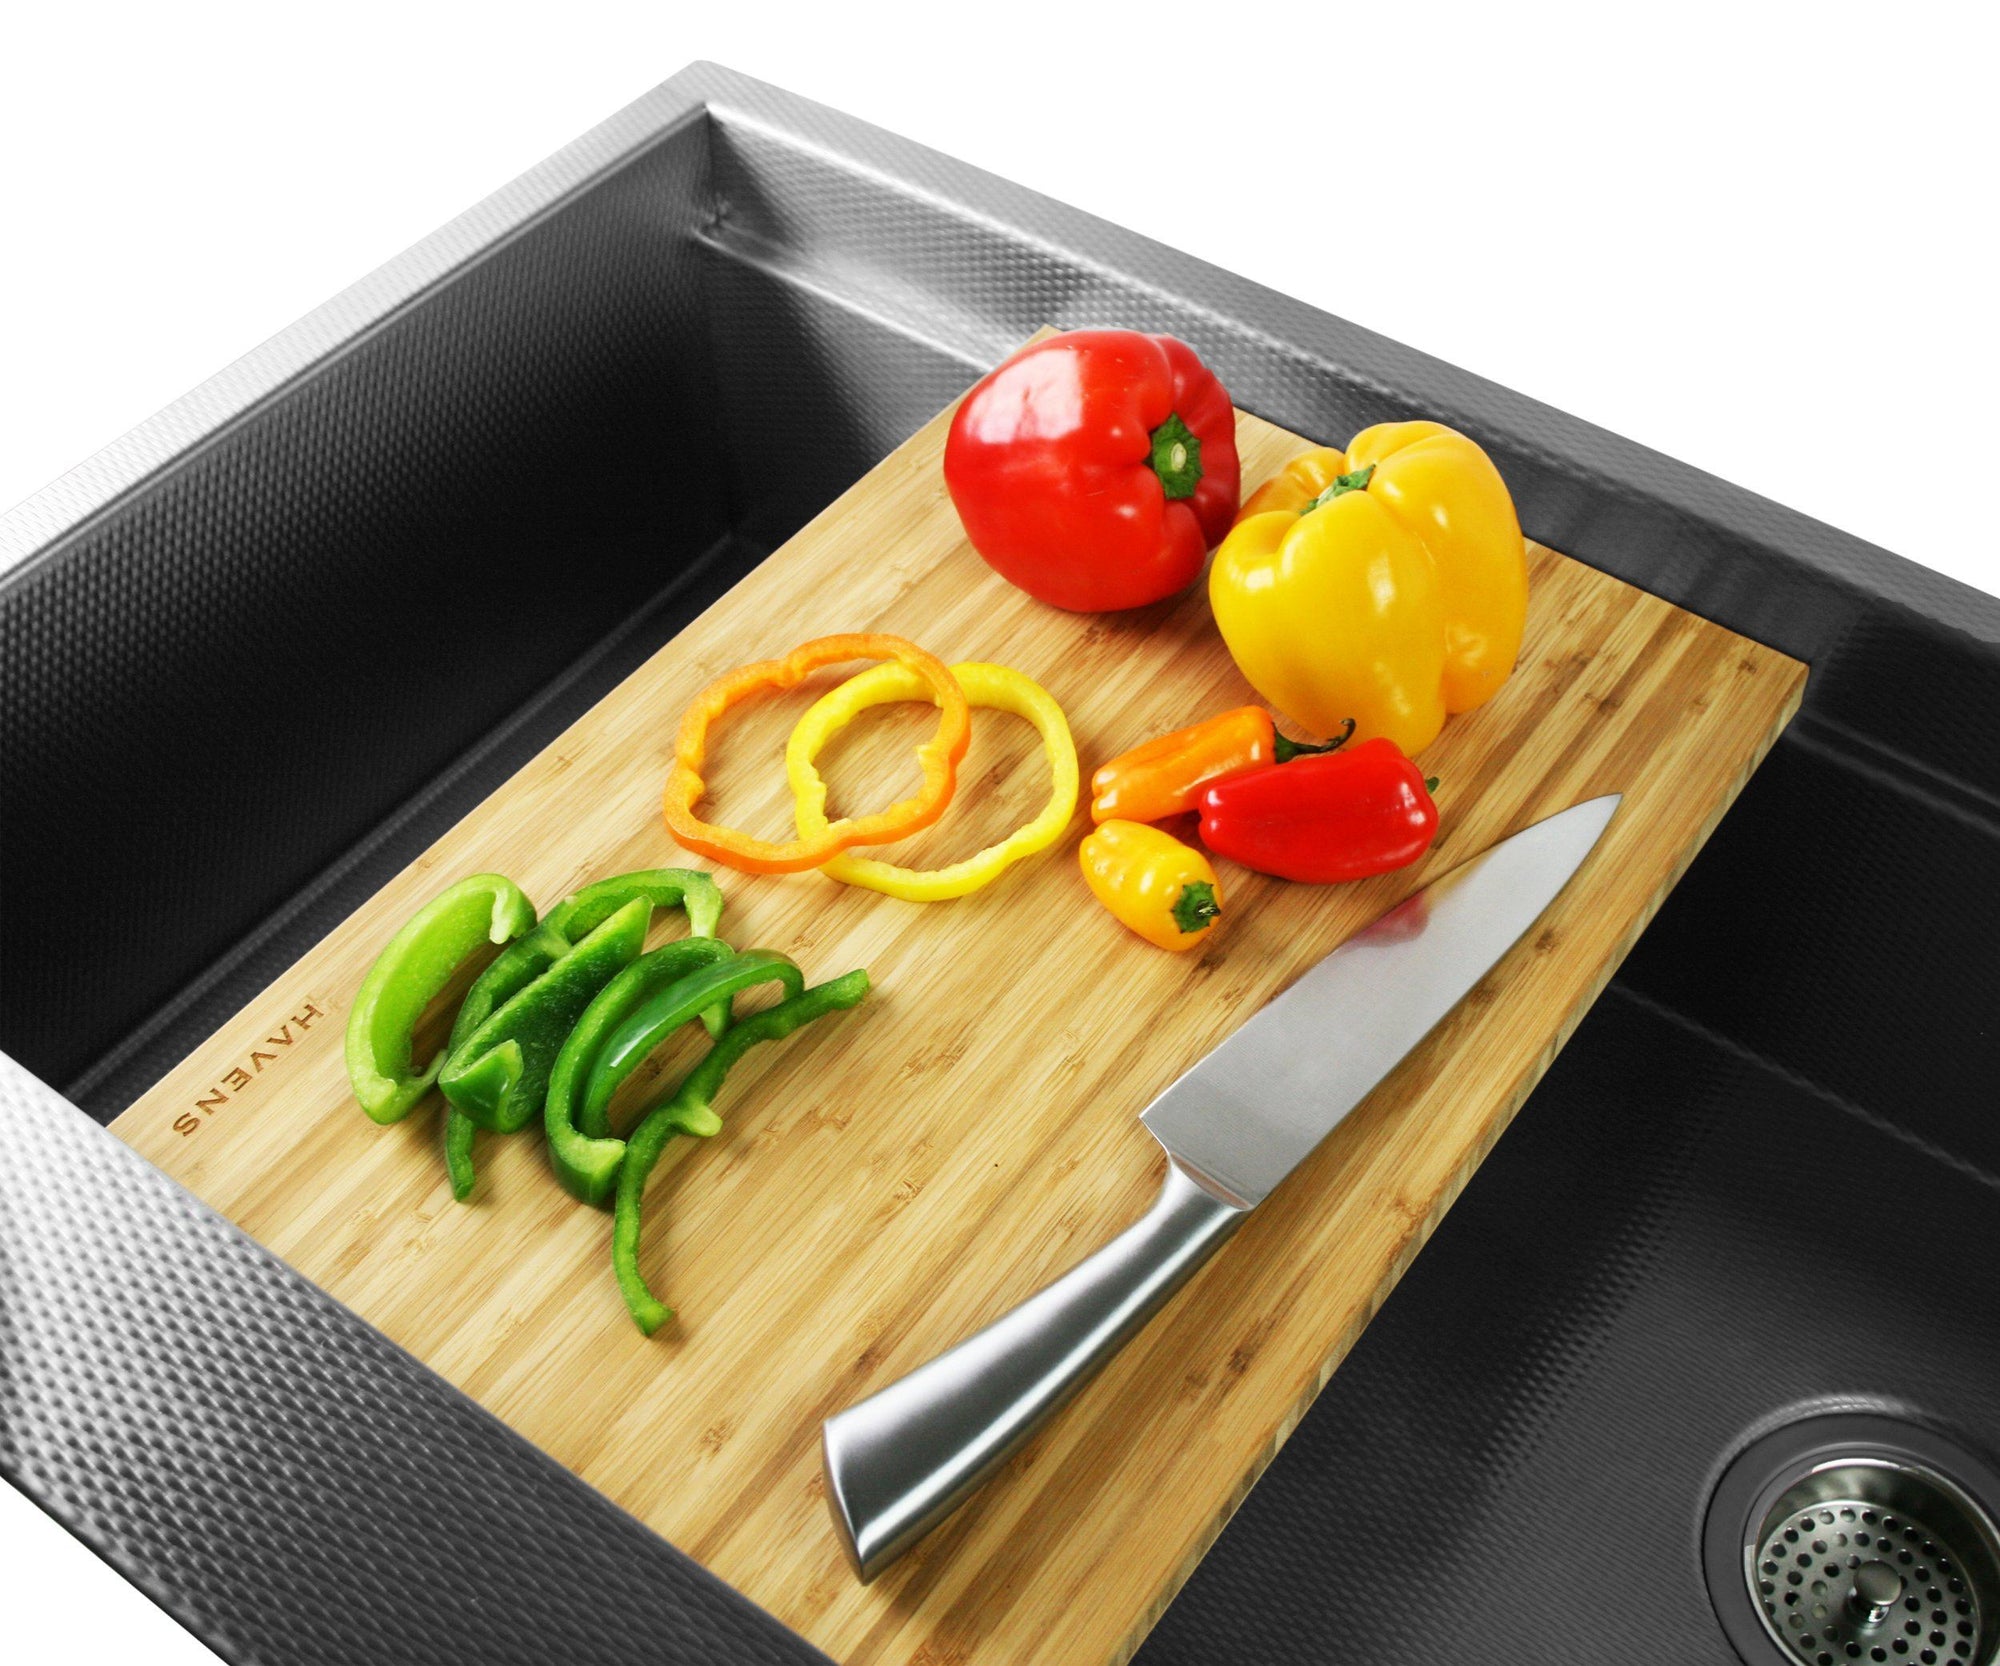 Light bamboo cutting board for stainless steel kitchen sink